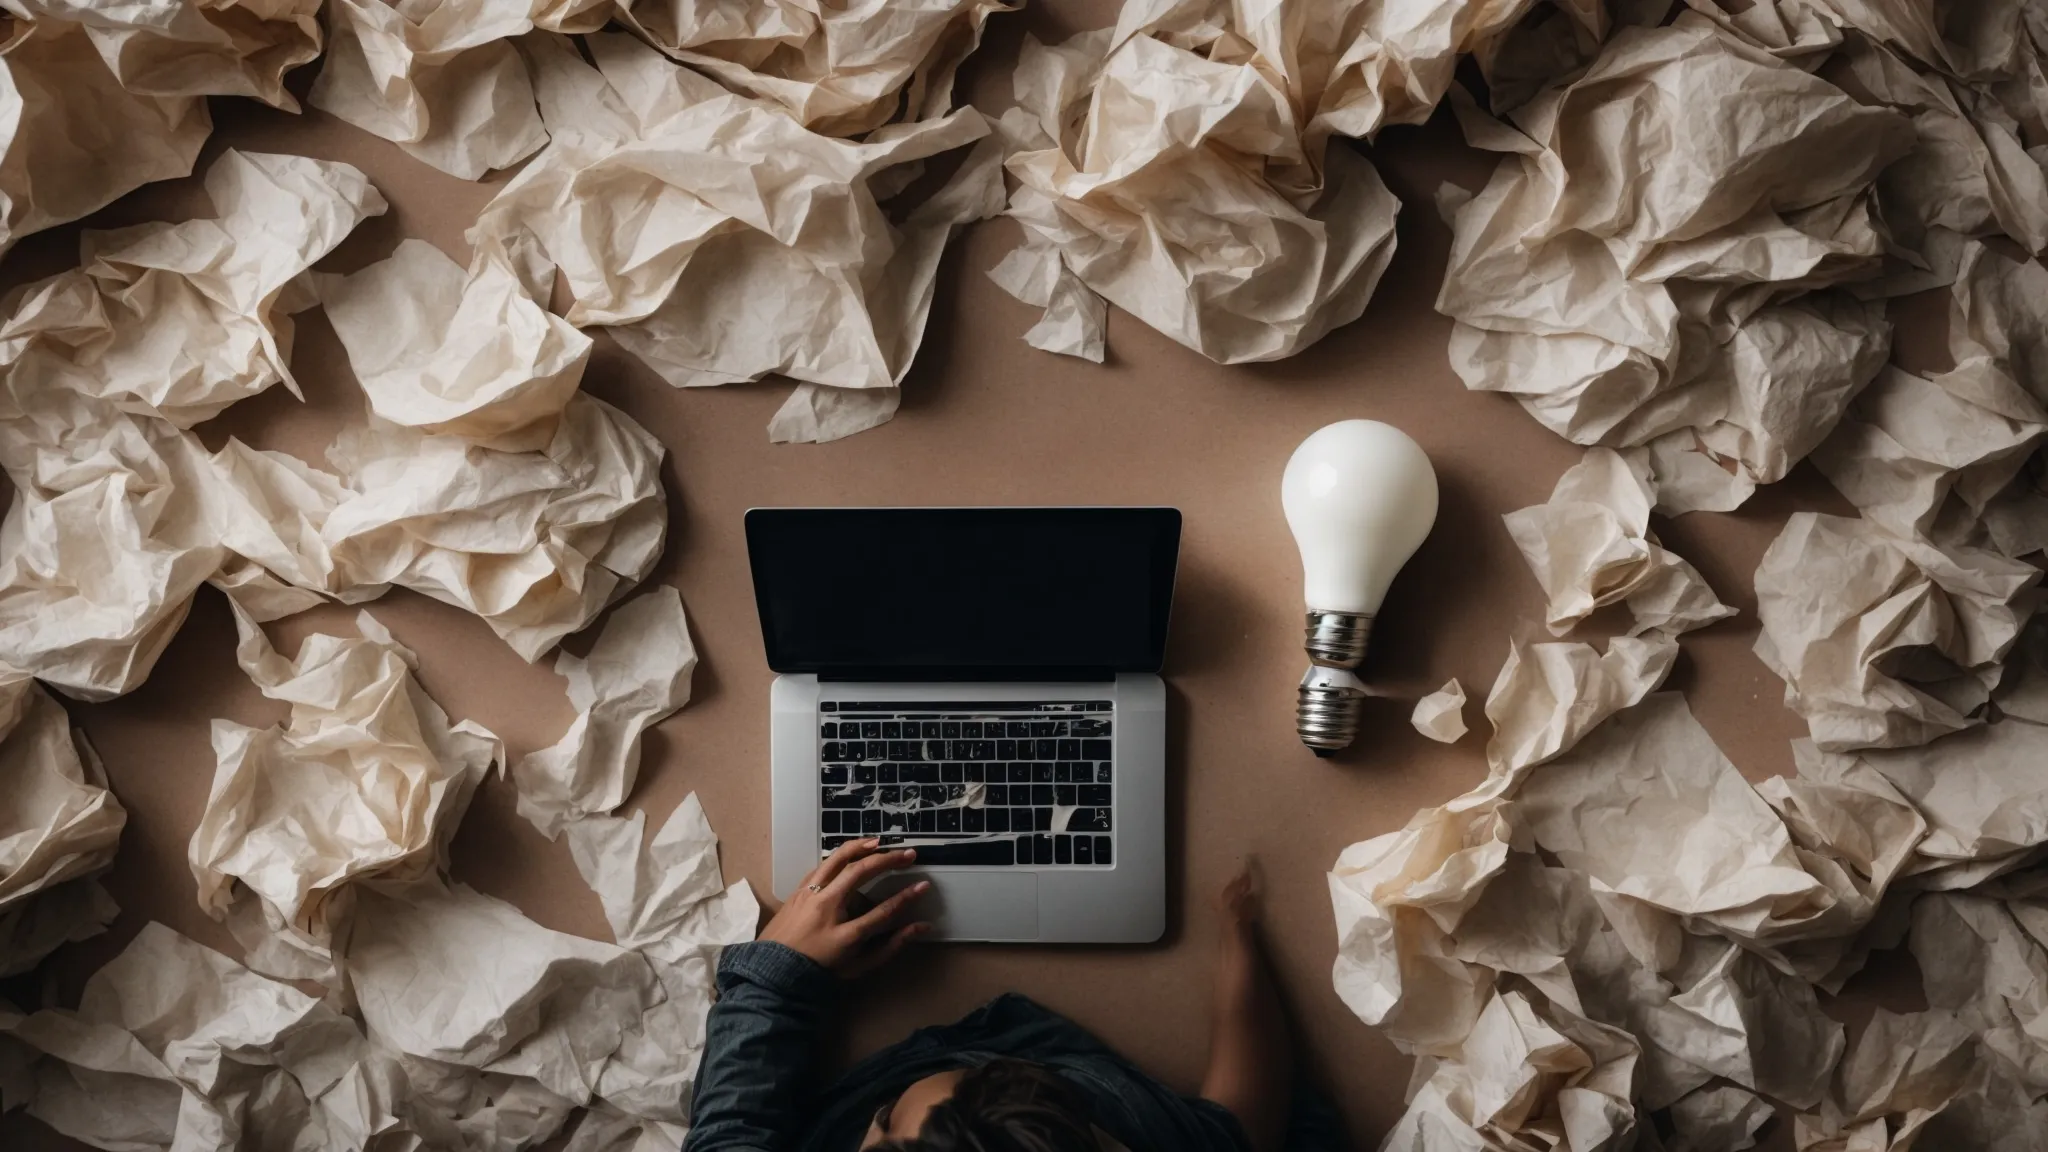 a person hovers over a laptop surrounded by crumpled paper and a light bulb—symbolizing the struggle between creative thinking and algorithmic strategies.